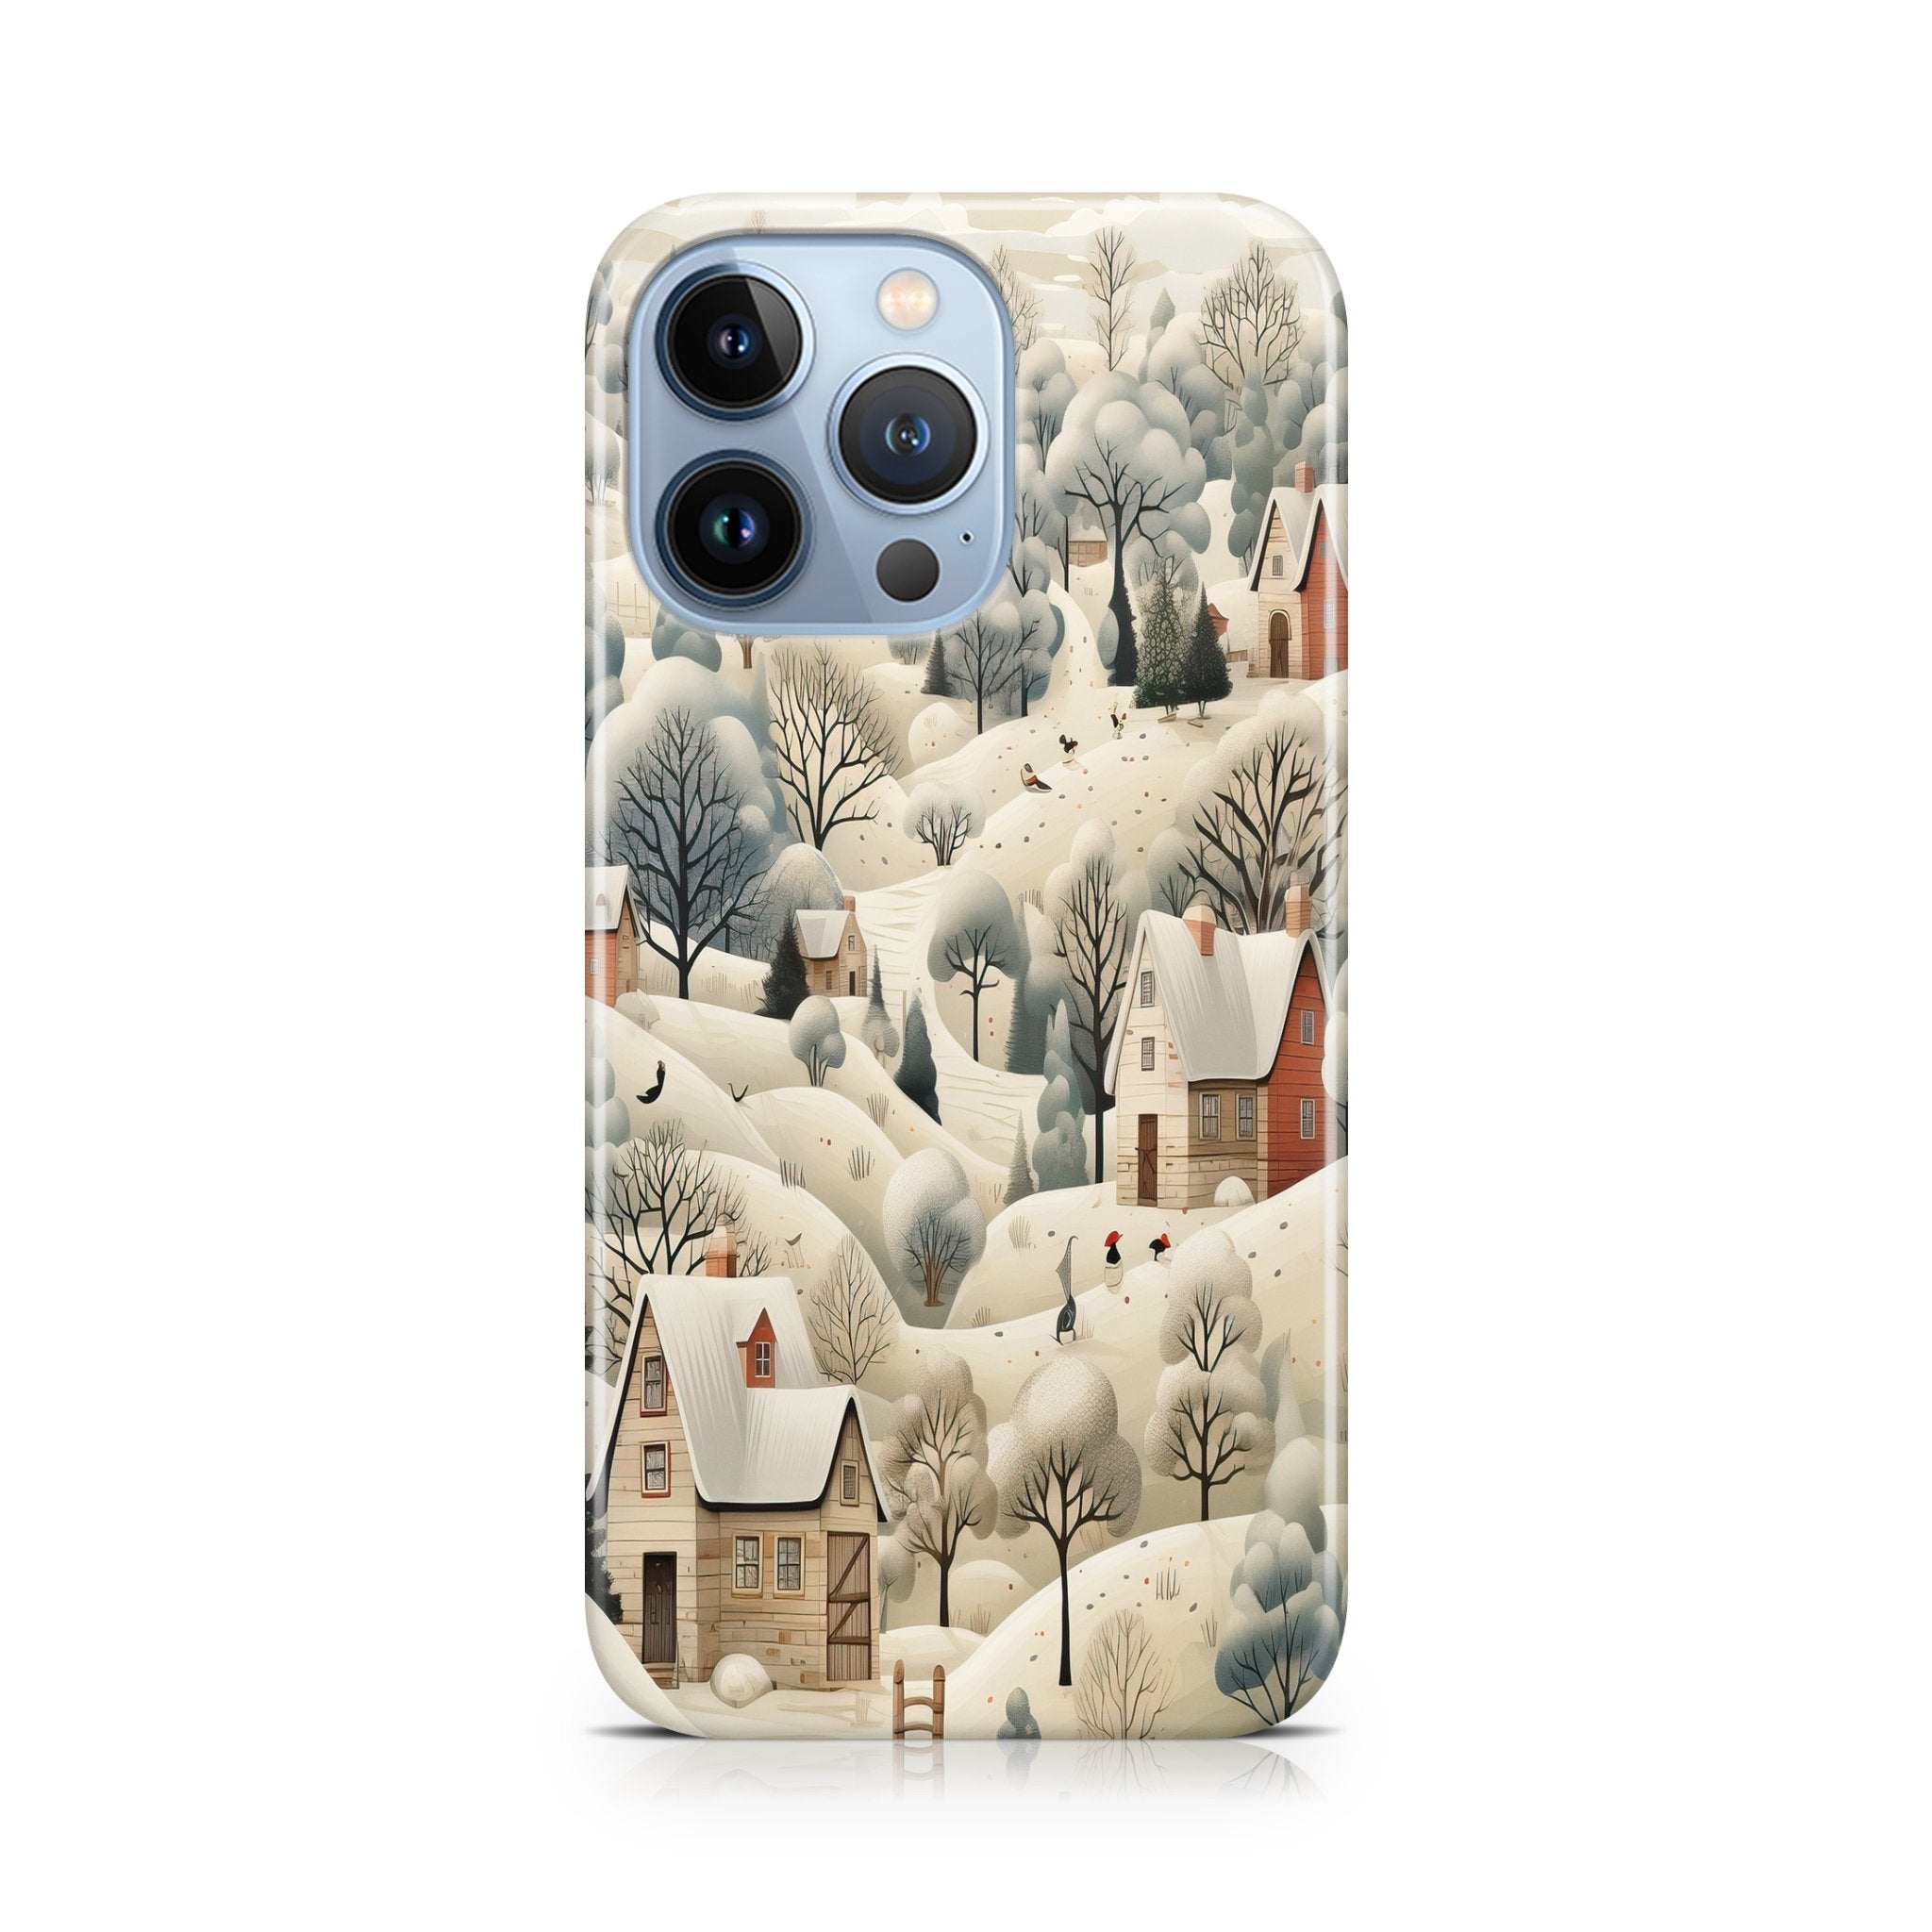 Snow Day - iPhone phone case designs by CaseSwagger